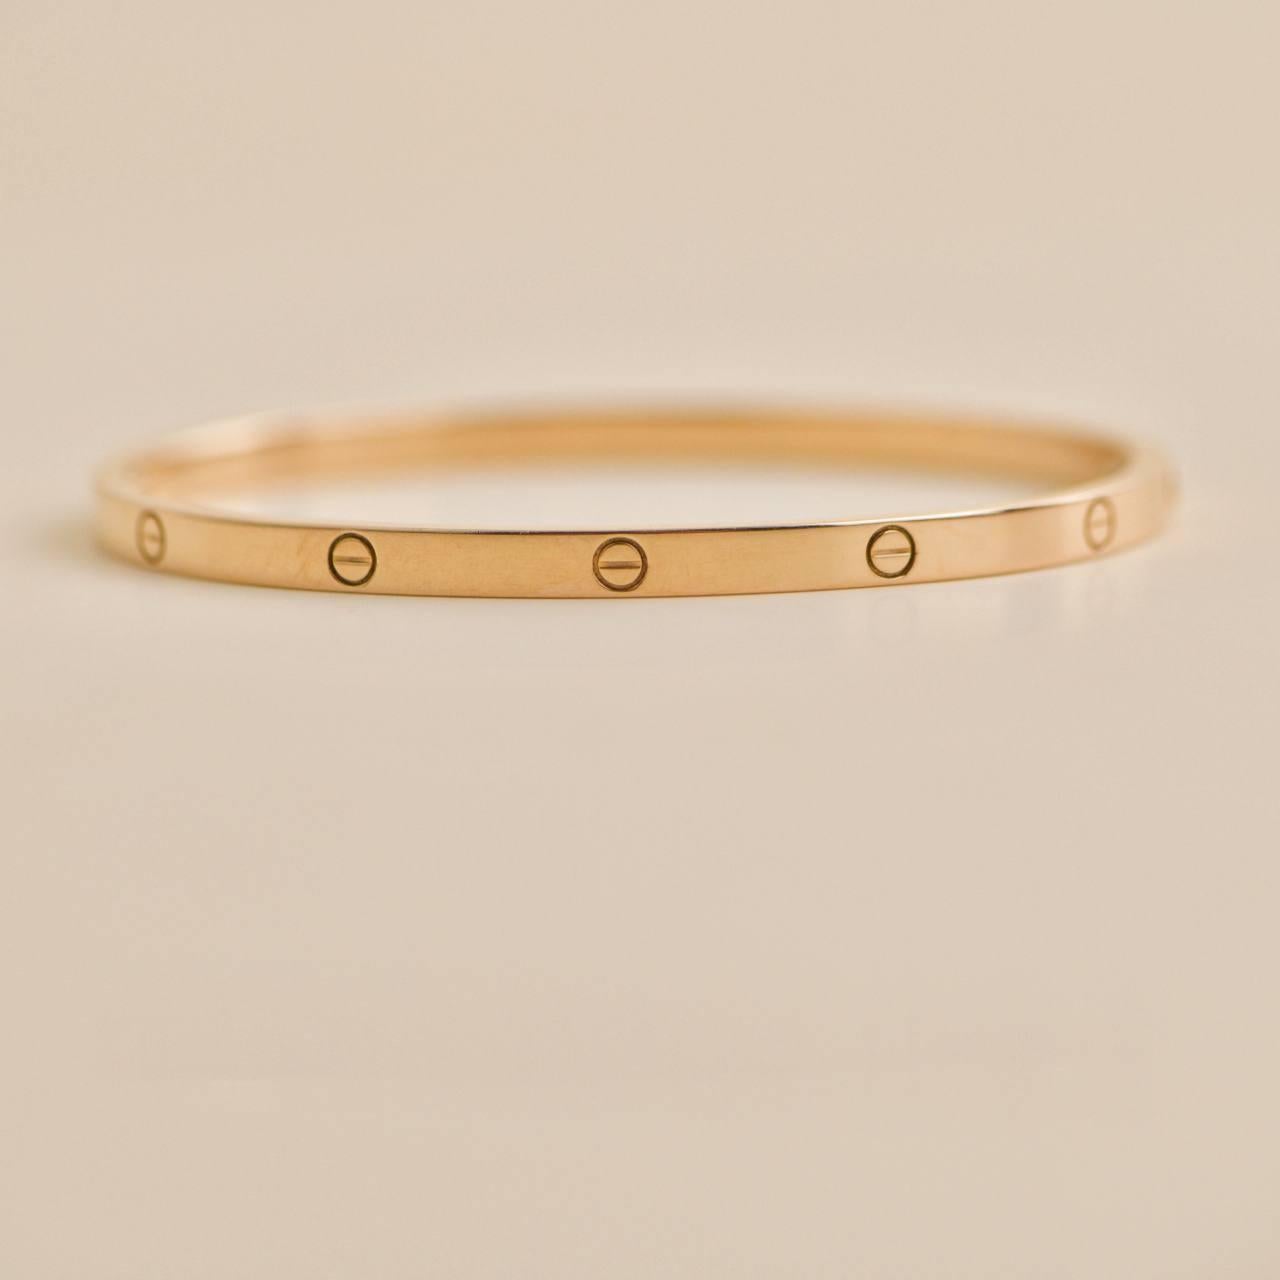 Cartier Love Bracelet Small Model 18k Rose Gold Size 17 In Excellent Condition For Sale In Banbury, GB